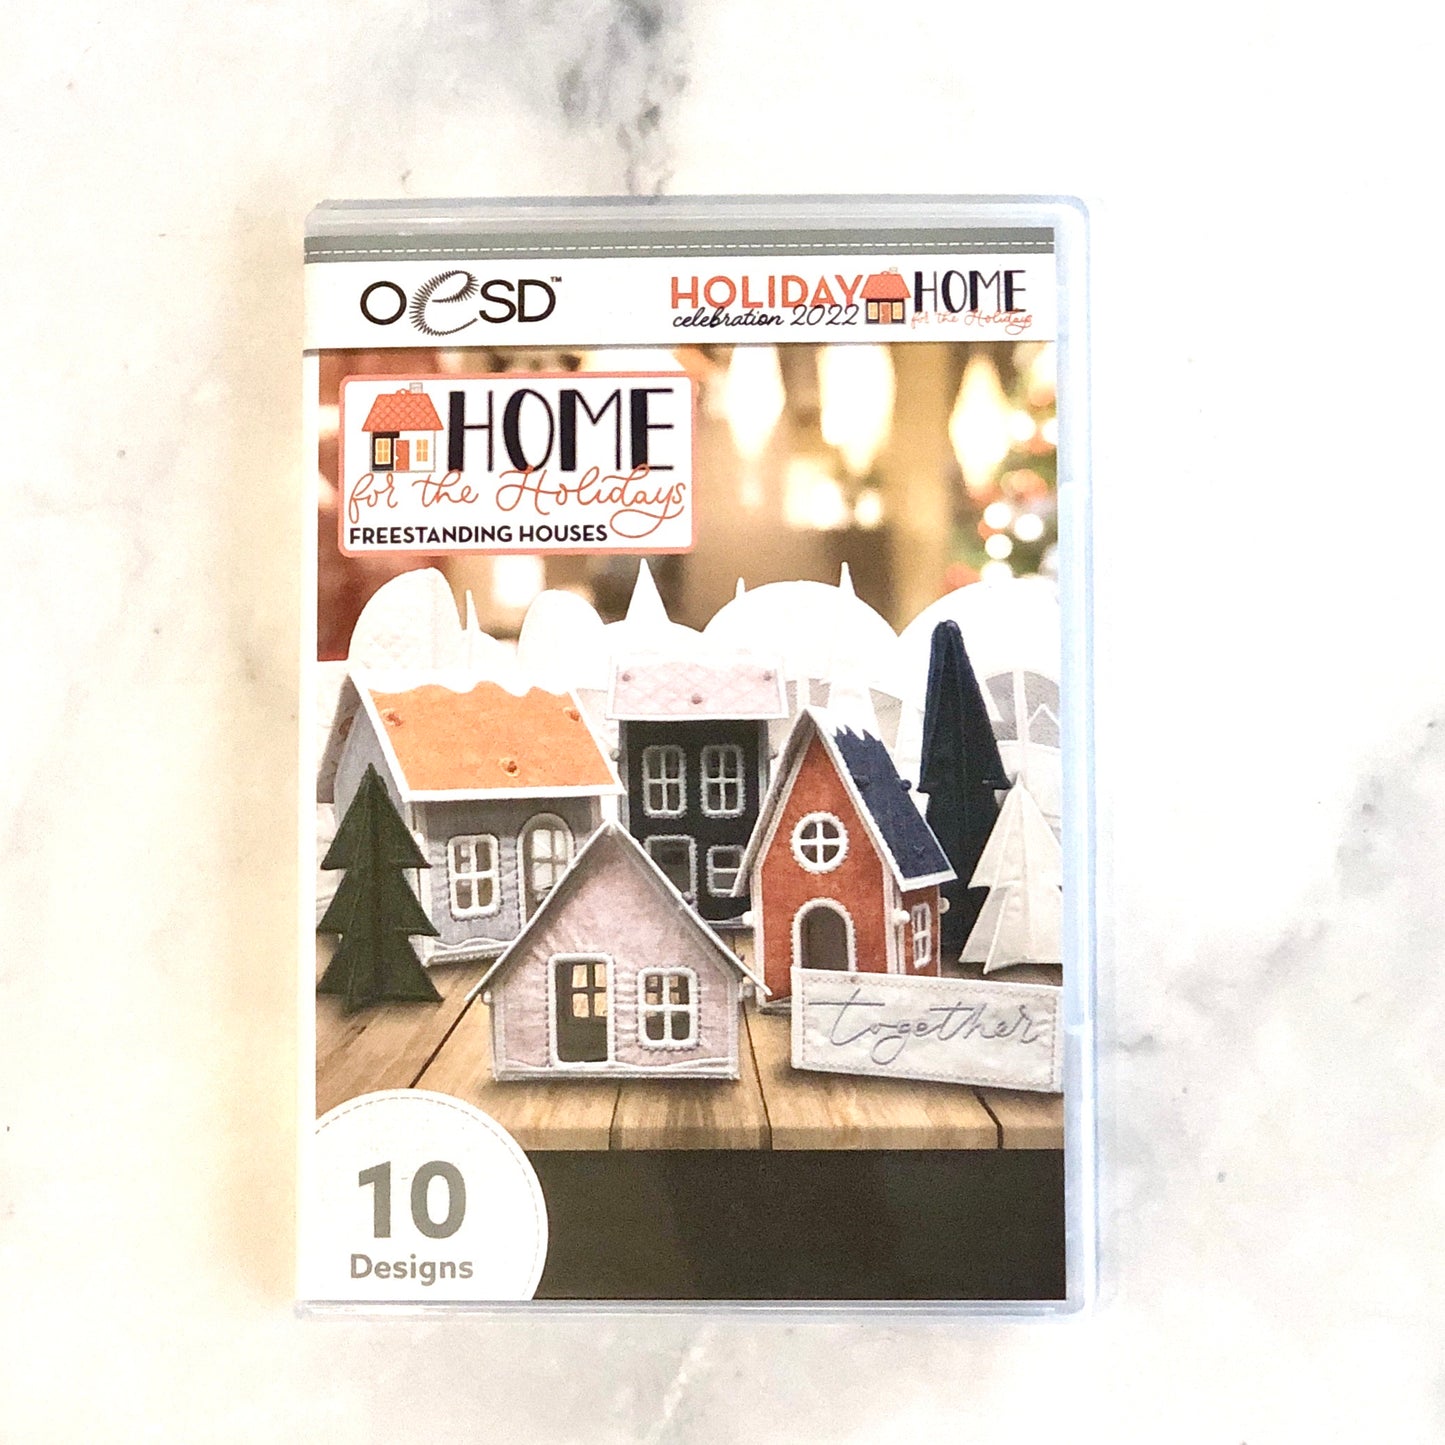 Home for the Holidays CD: Freestanding Houses